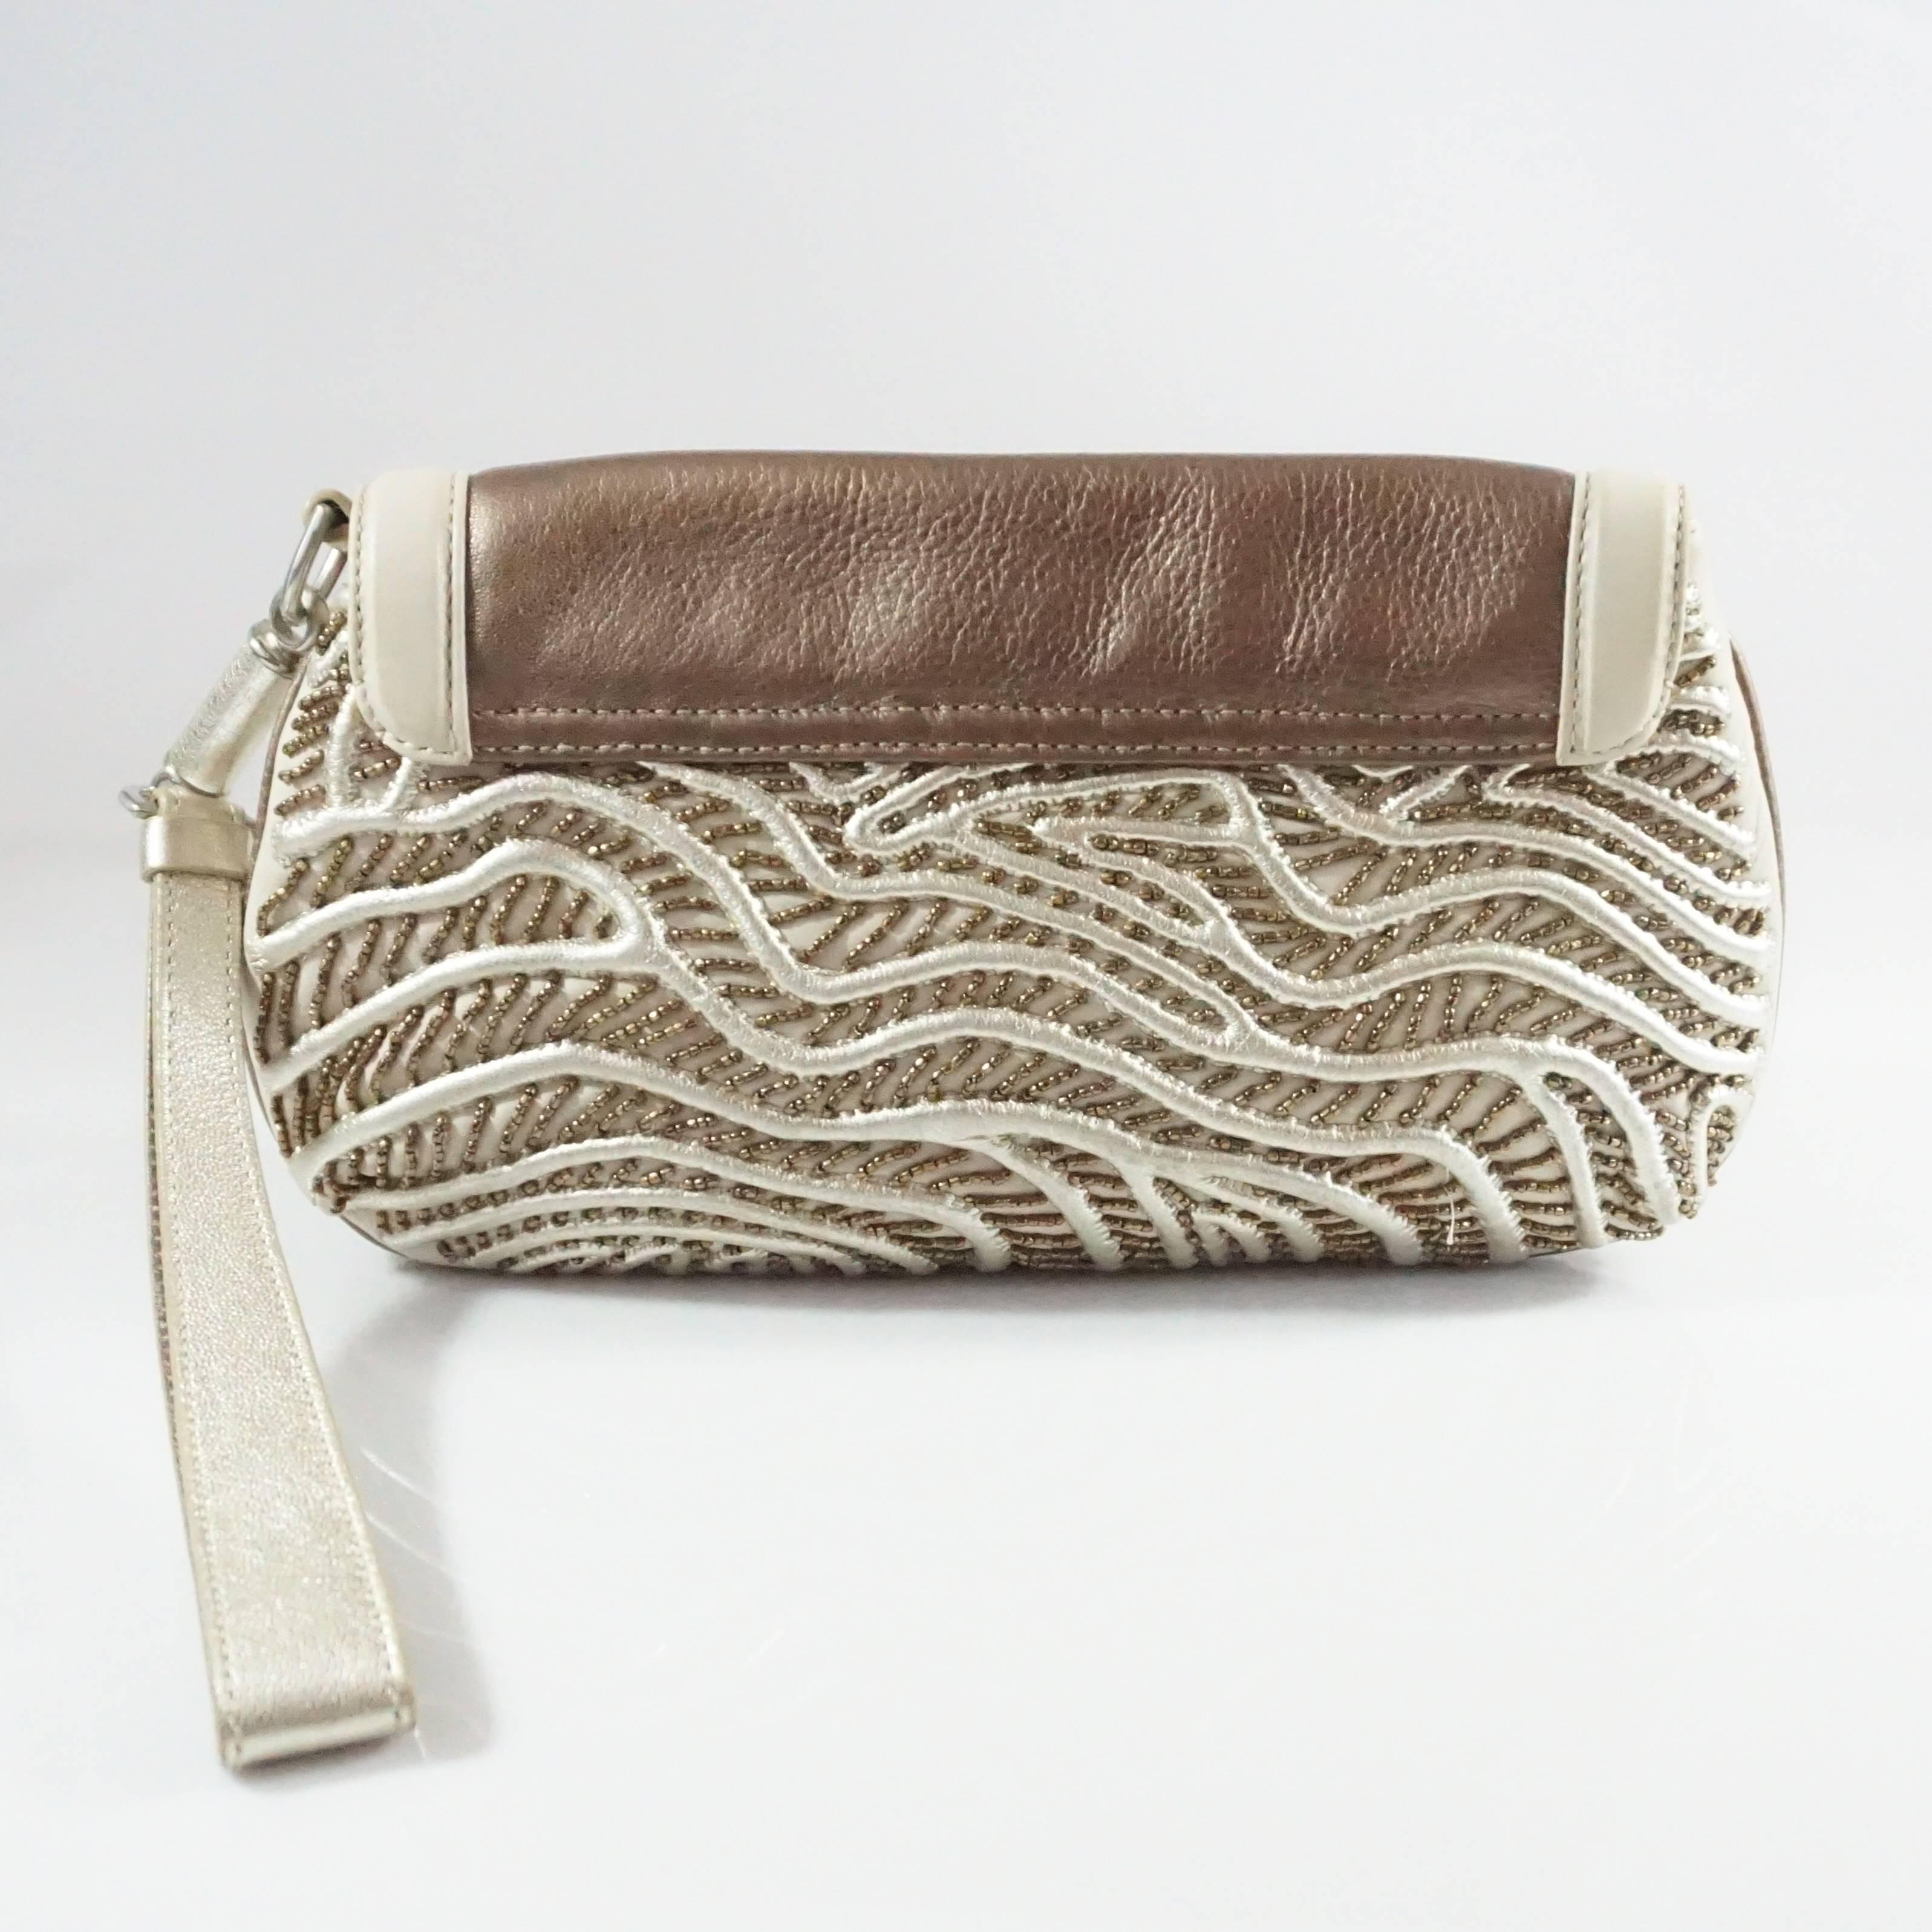 This Alberta Ferretti clutch is a roomy statement clutch. It's made of ivory leather with gold ribbing and brown bead detailing and also has a bronze leather flap. Additionally, the bag features a snap clasp, horn detail, wrist strap, and 1 interior